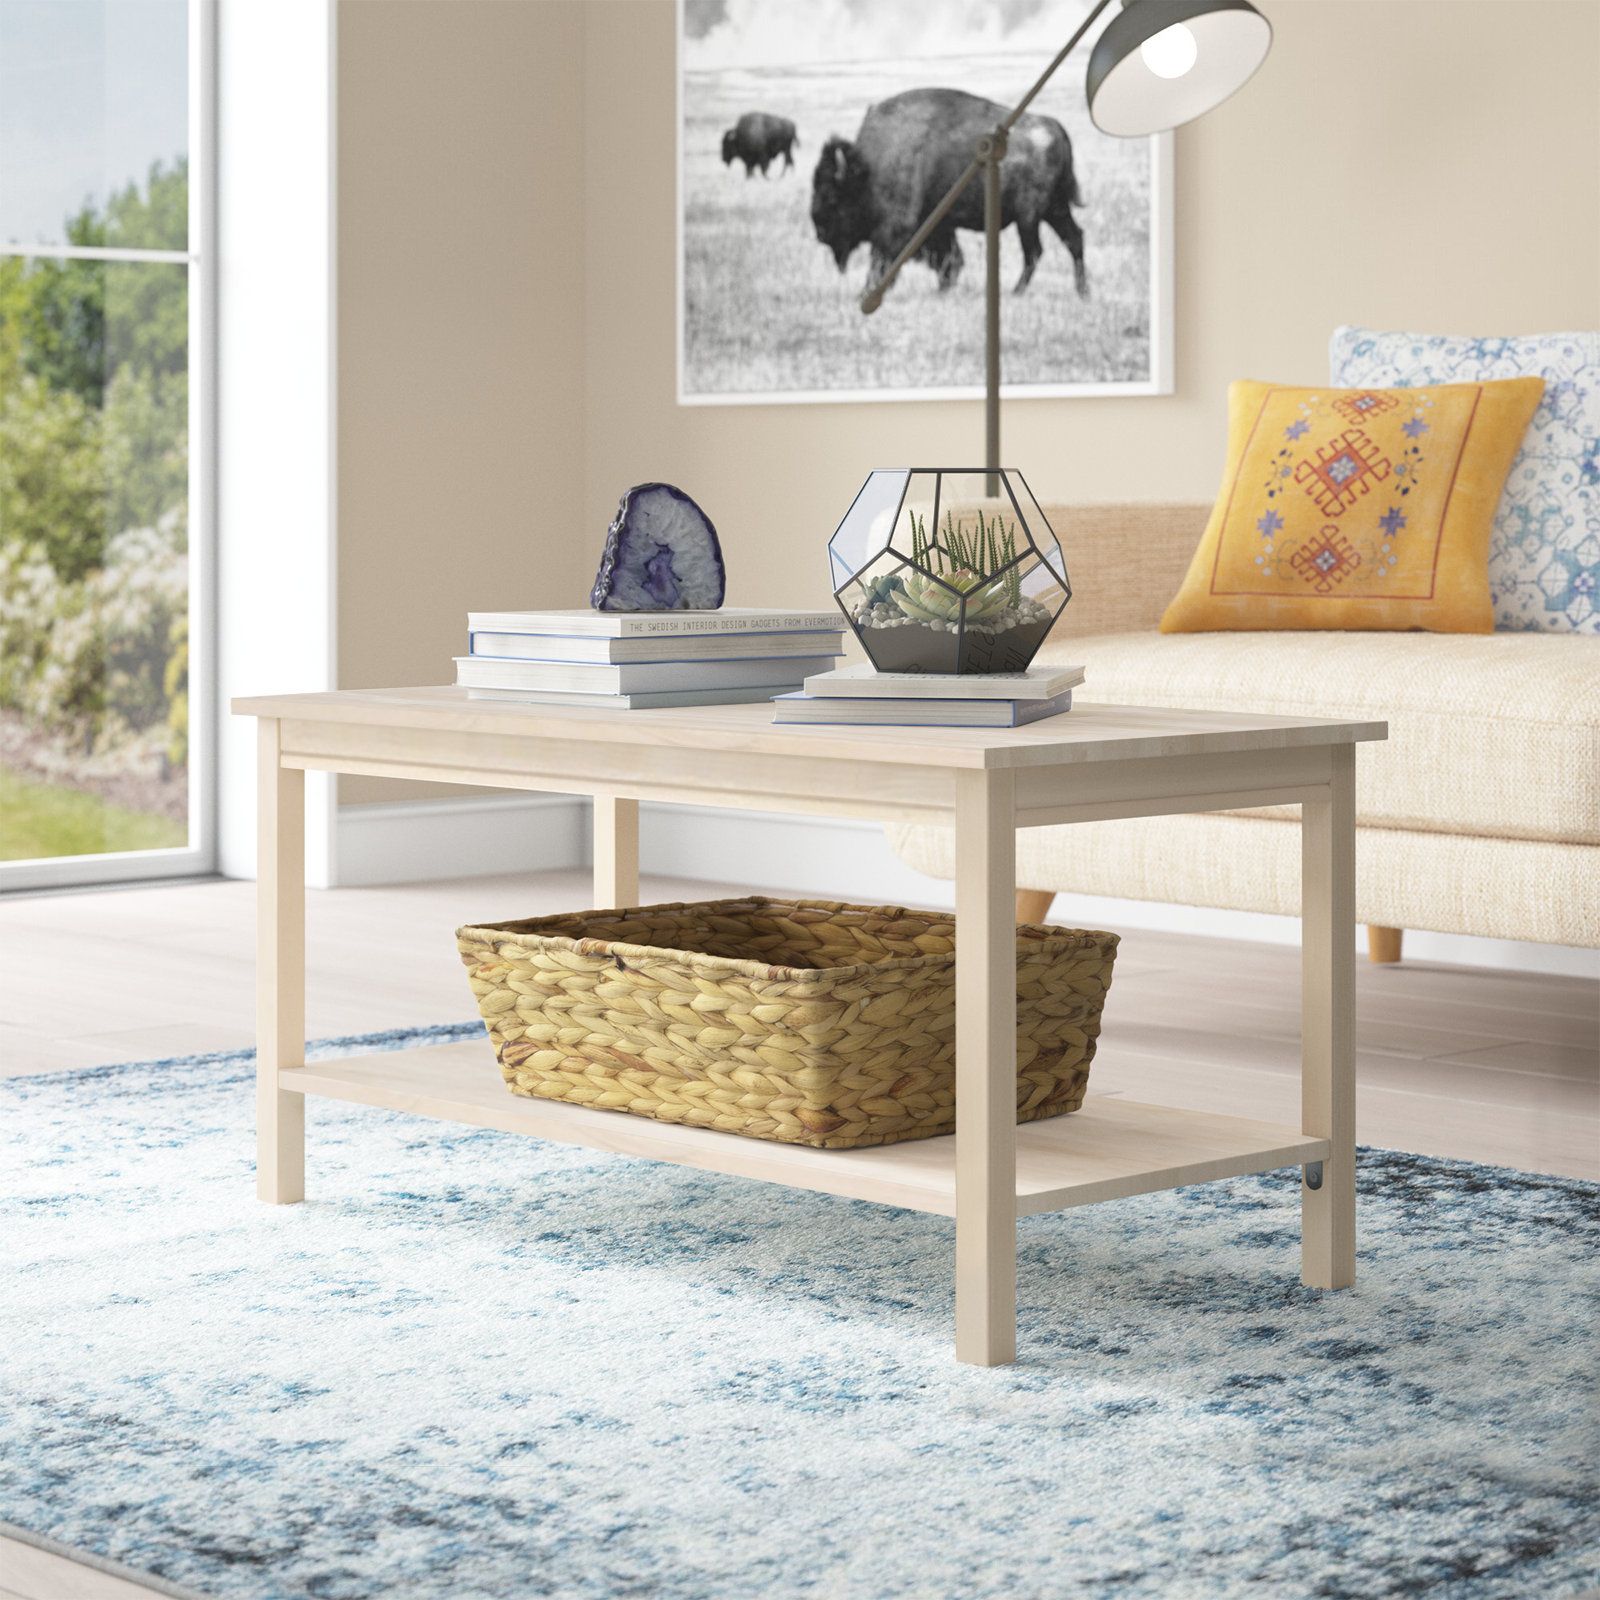 Mistana™ Lynn Coffee Table & Reviews | Wayfair For Simple Design Coffee Tables (View 6 of 15)